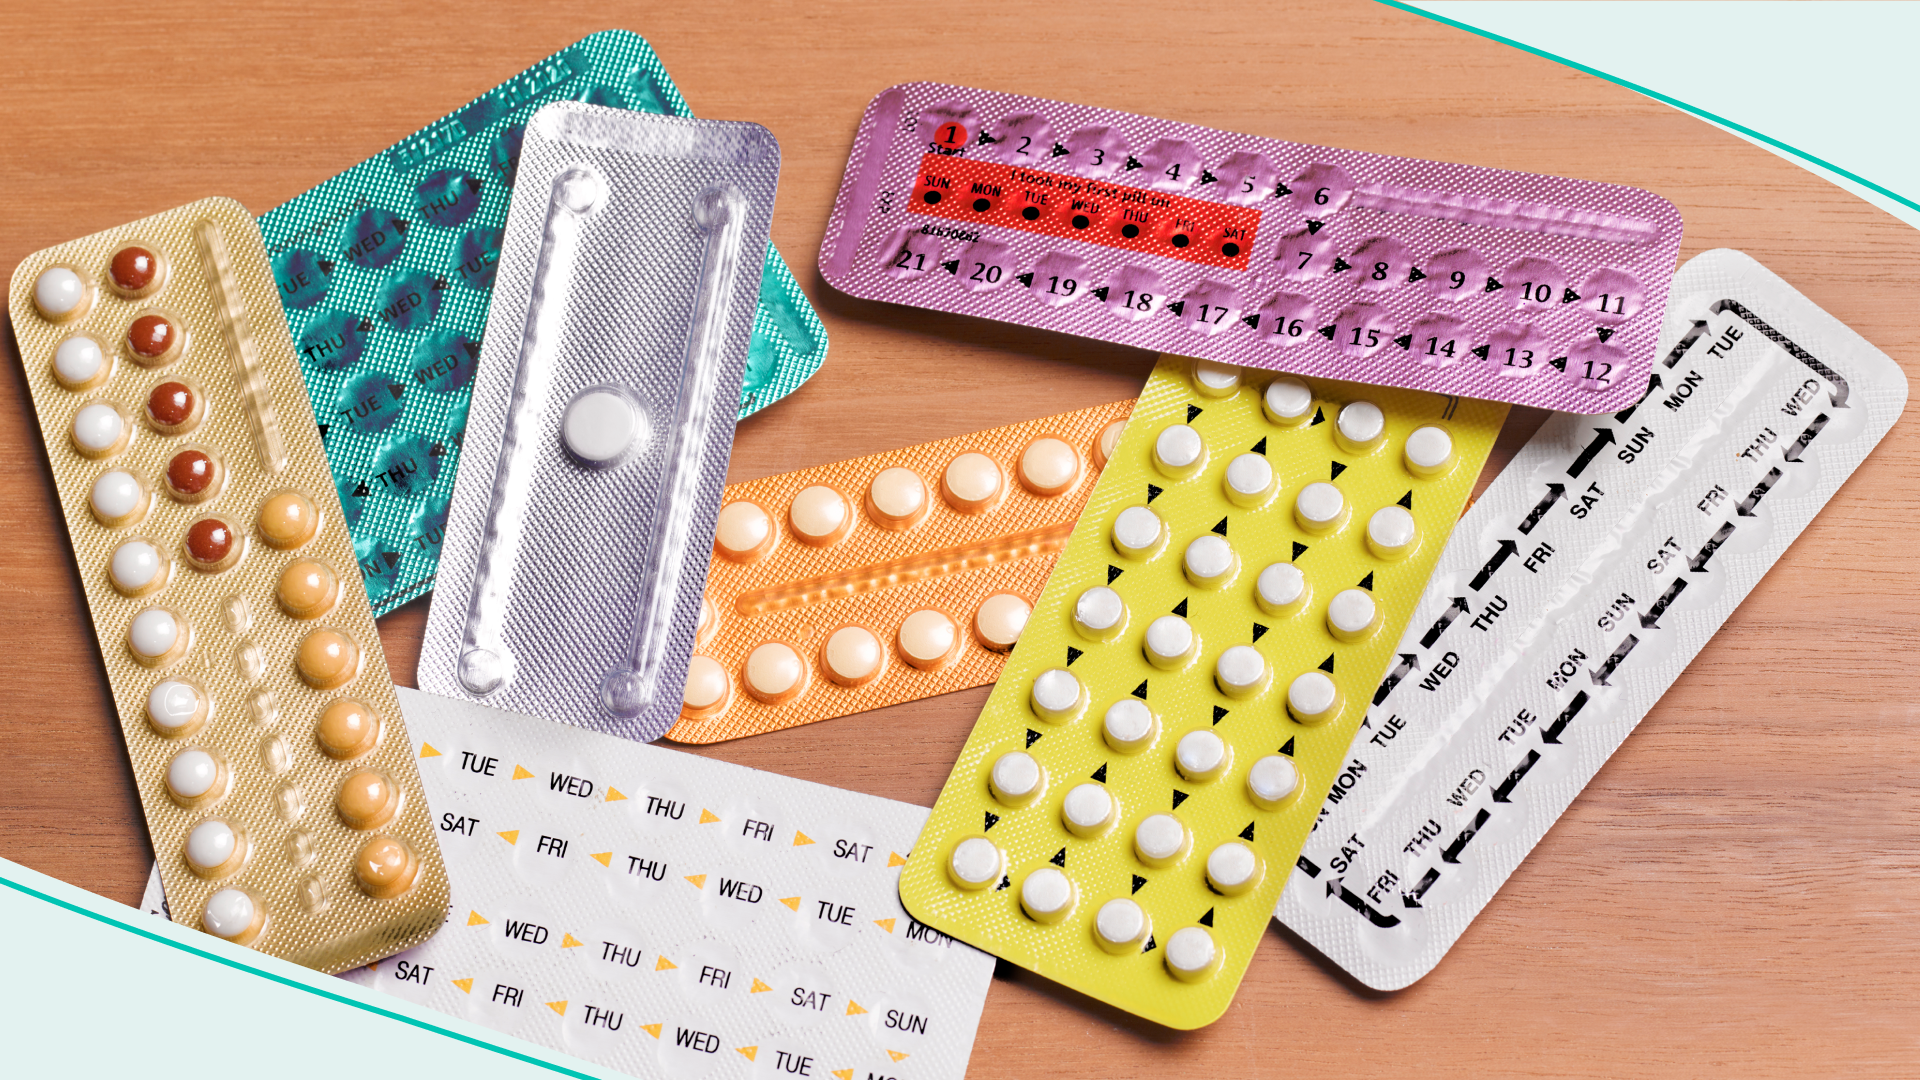 Birth control pills blister pack - stock photo